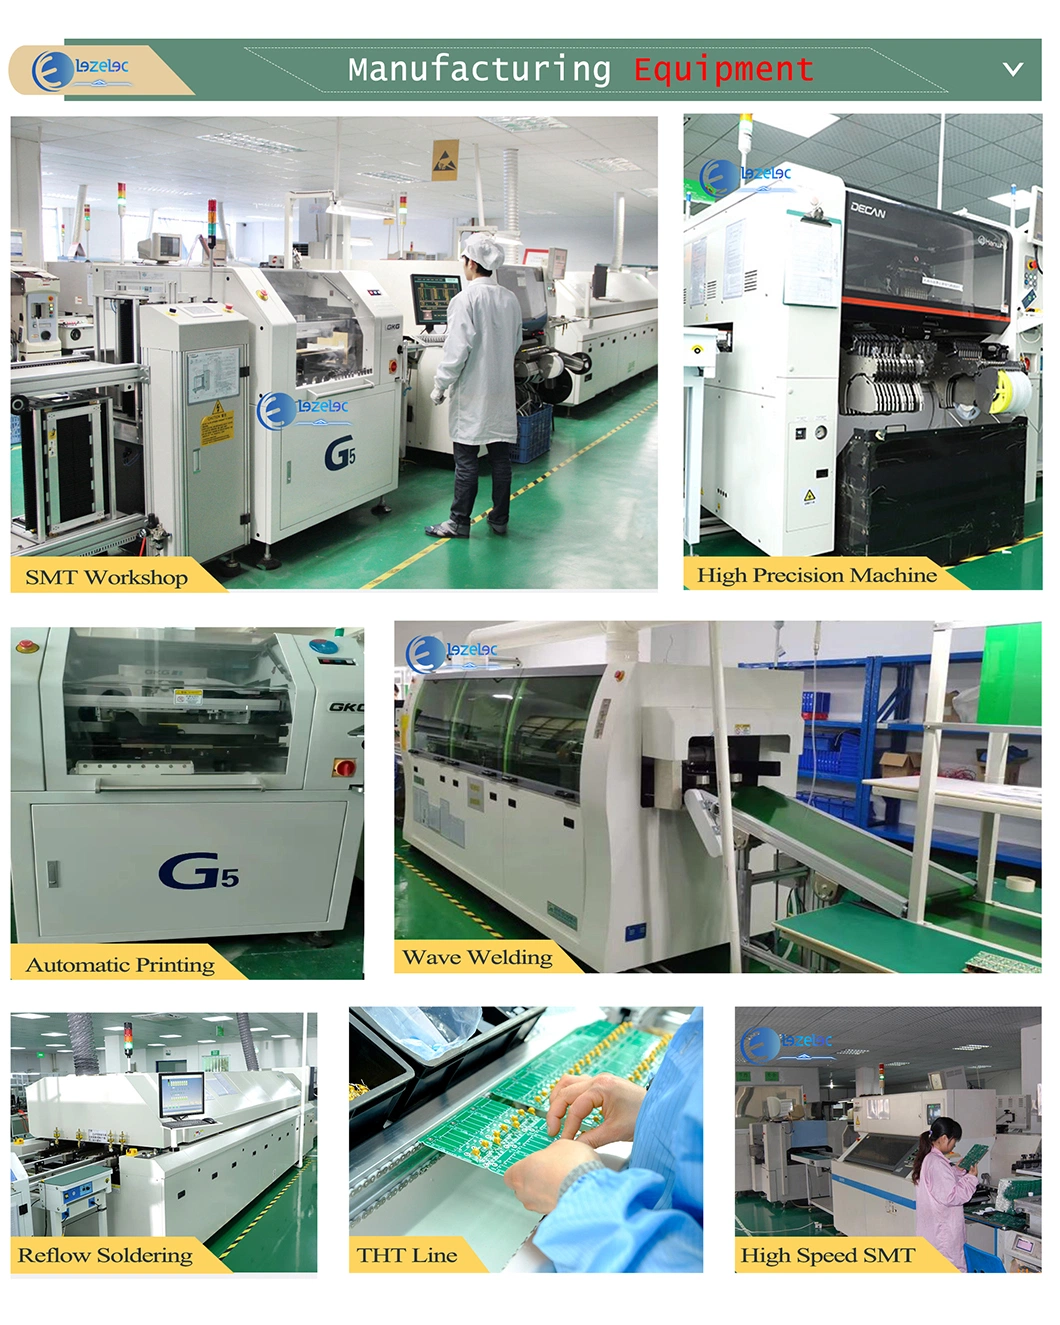 Good Quality Professional OEM/ODM One-Stop PCB Service PCB Design Manufacturer in Dongguan